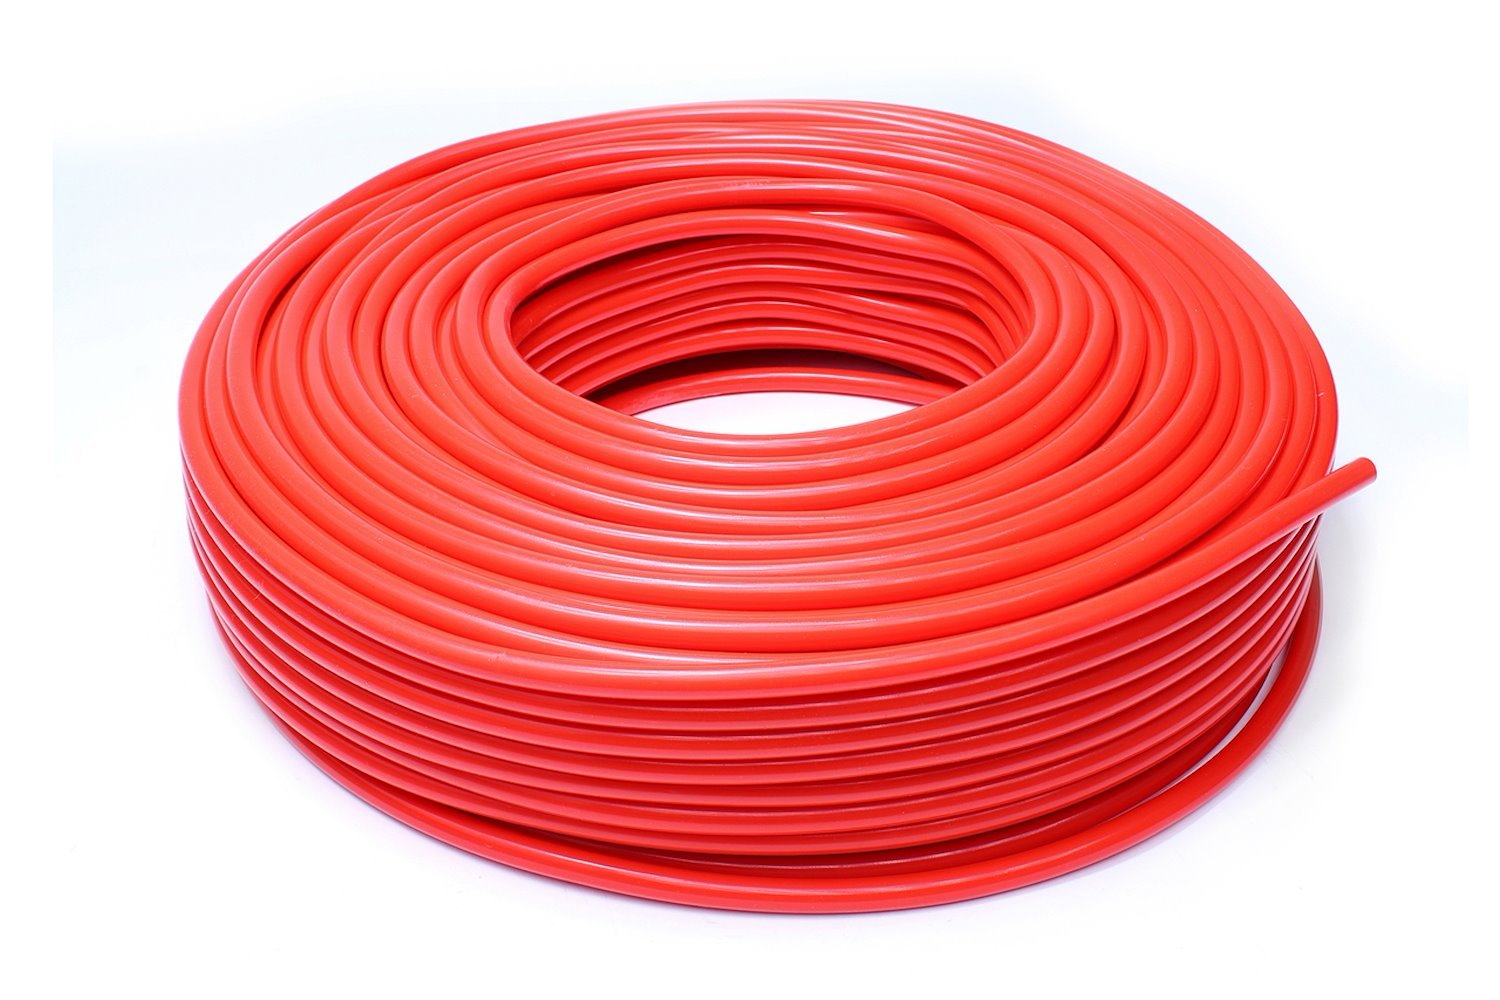 HTSVH3-REDx100 High-Temperature Silicone Vacuum Hose Tubing, 1/8 in. ID, 100 ft. Roll, Red